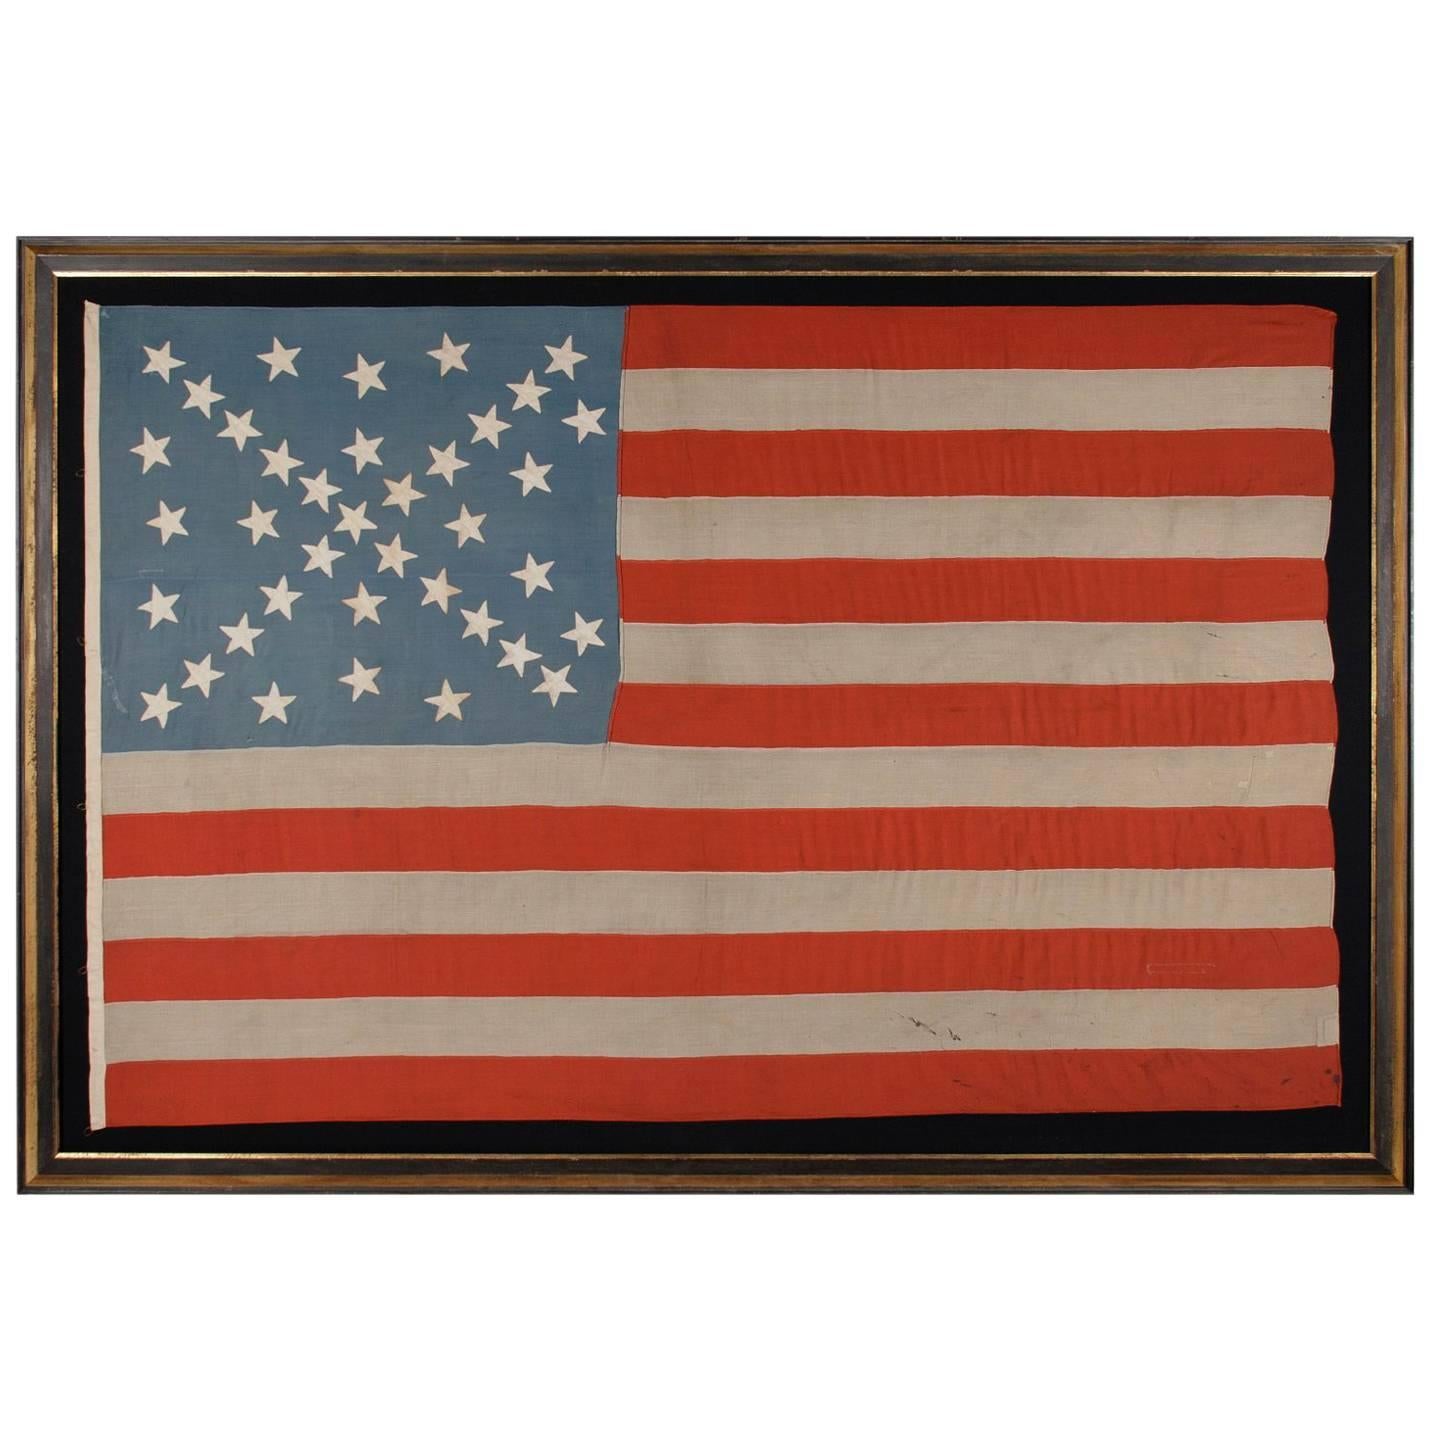 38 Stars in a Starburst Cross on an Antique American Flag, Colorado Statehood